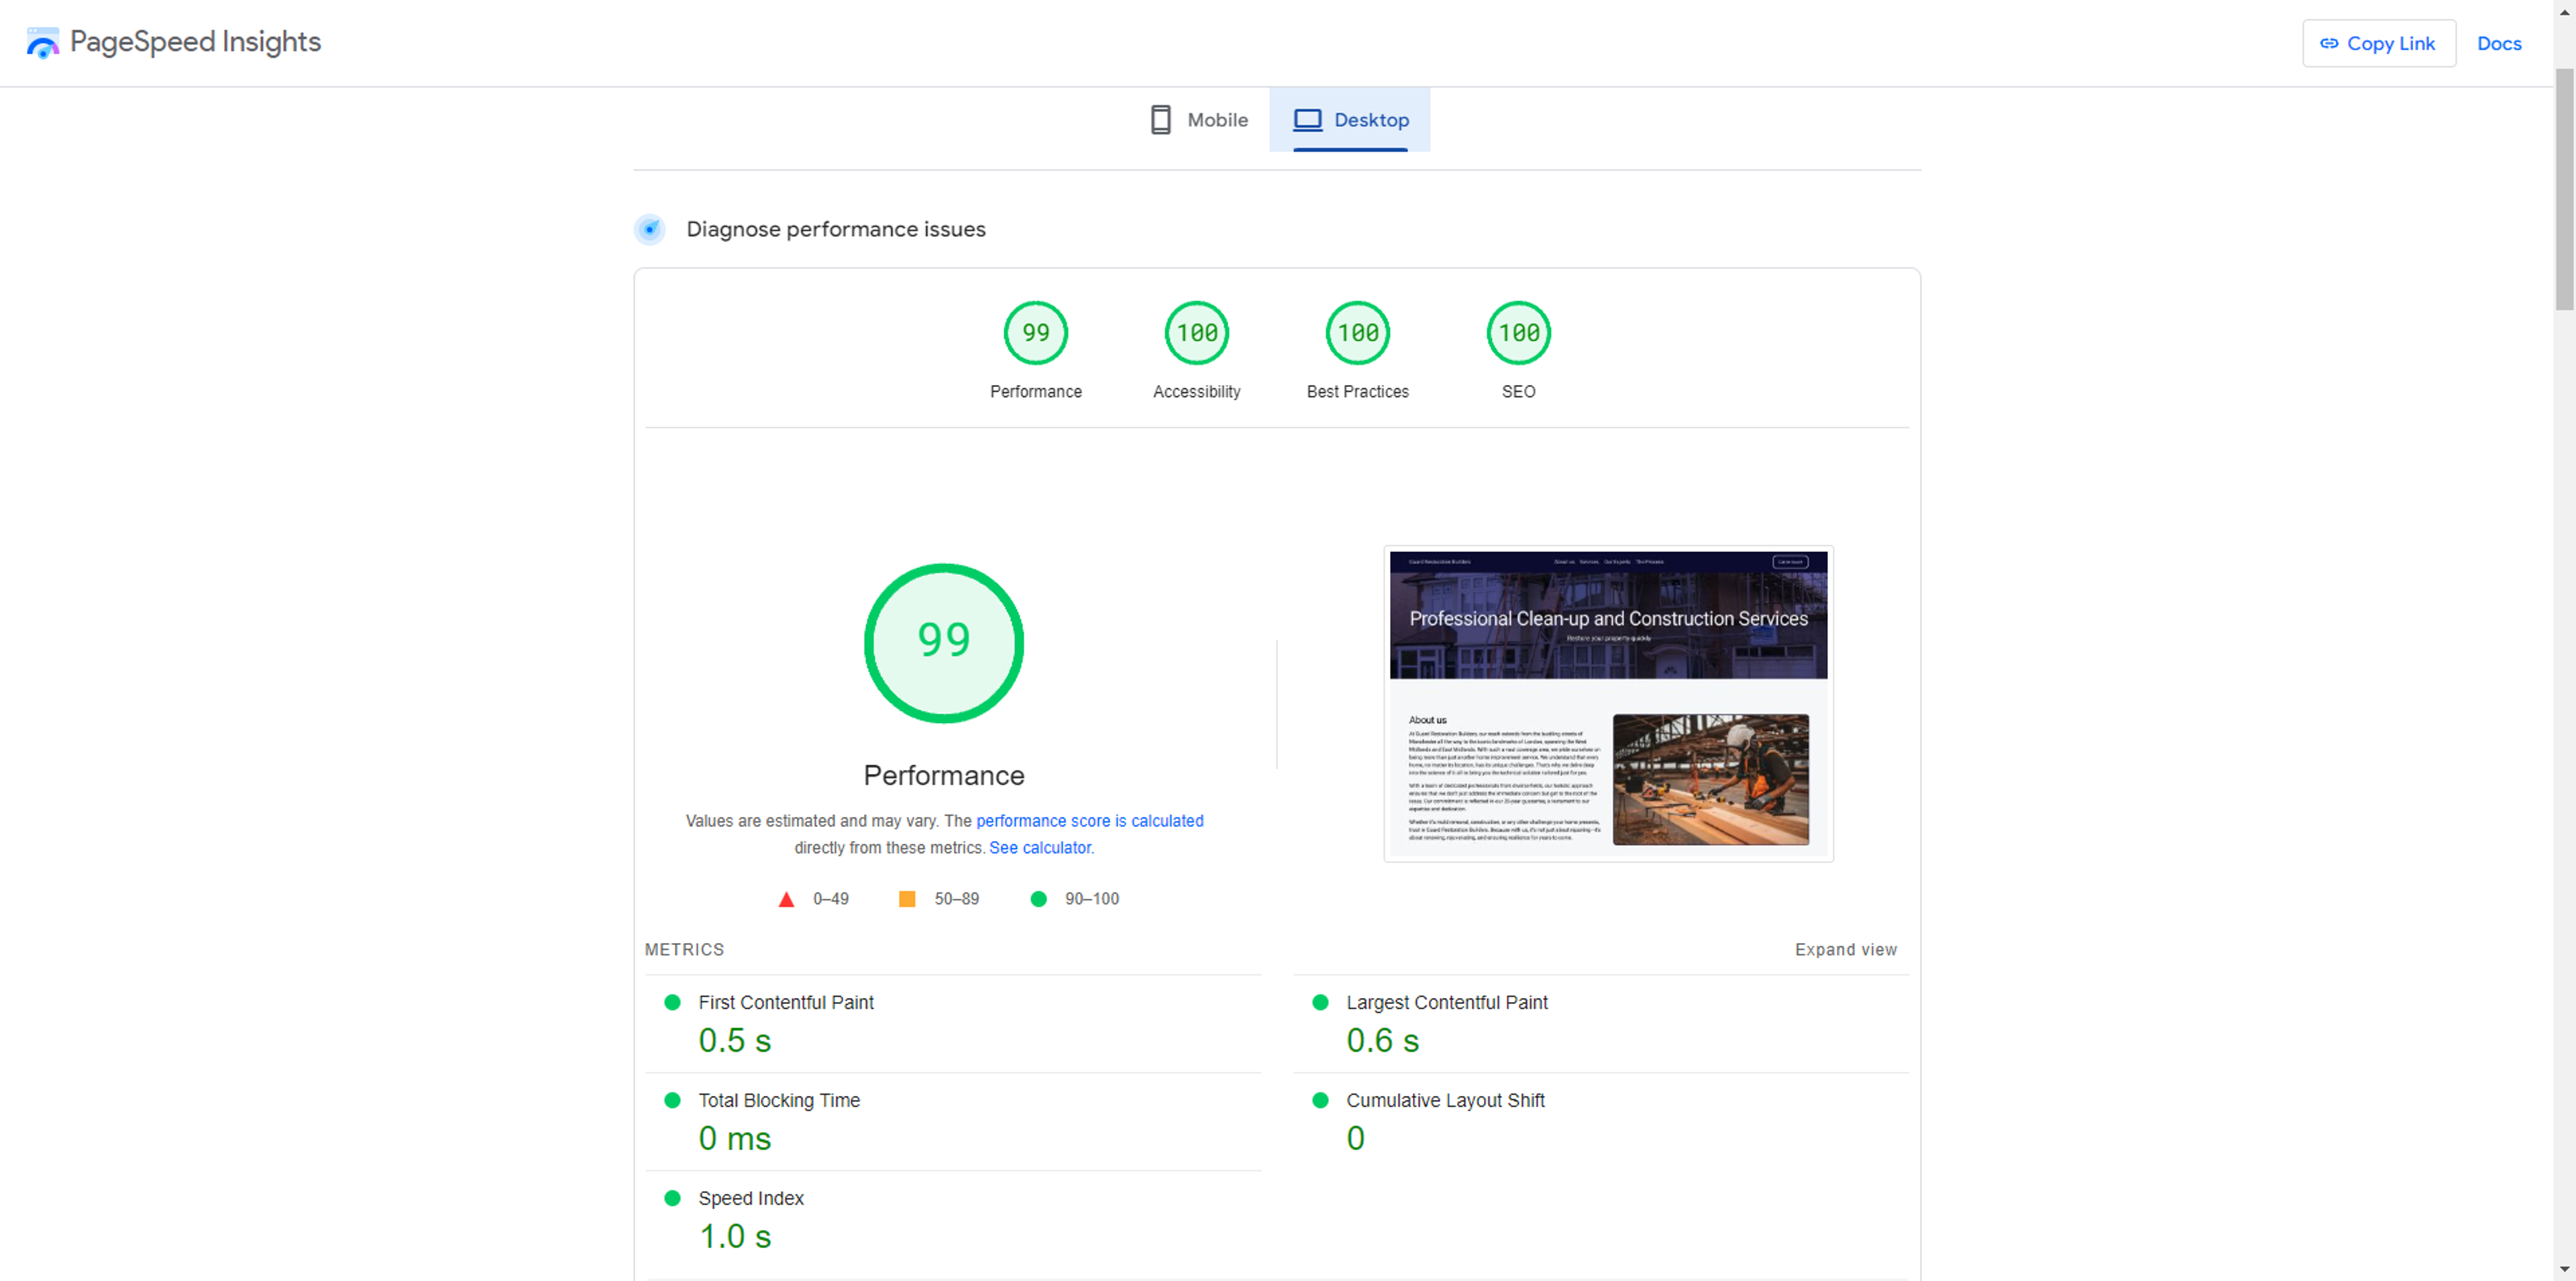 Google PageSpeed desktop results, performance scoring 99 and the rest 100